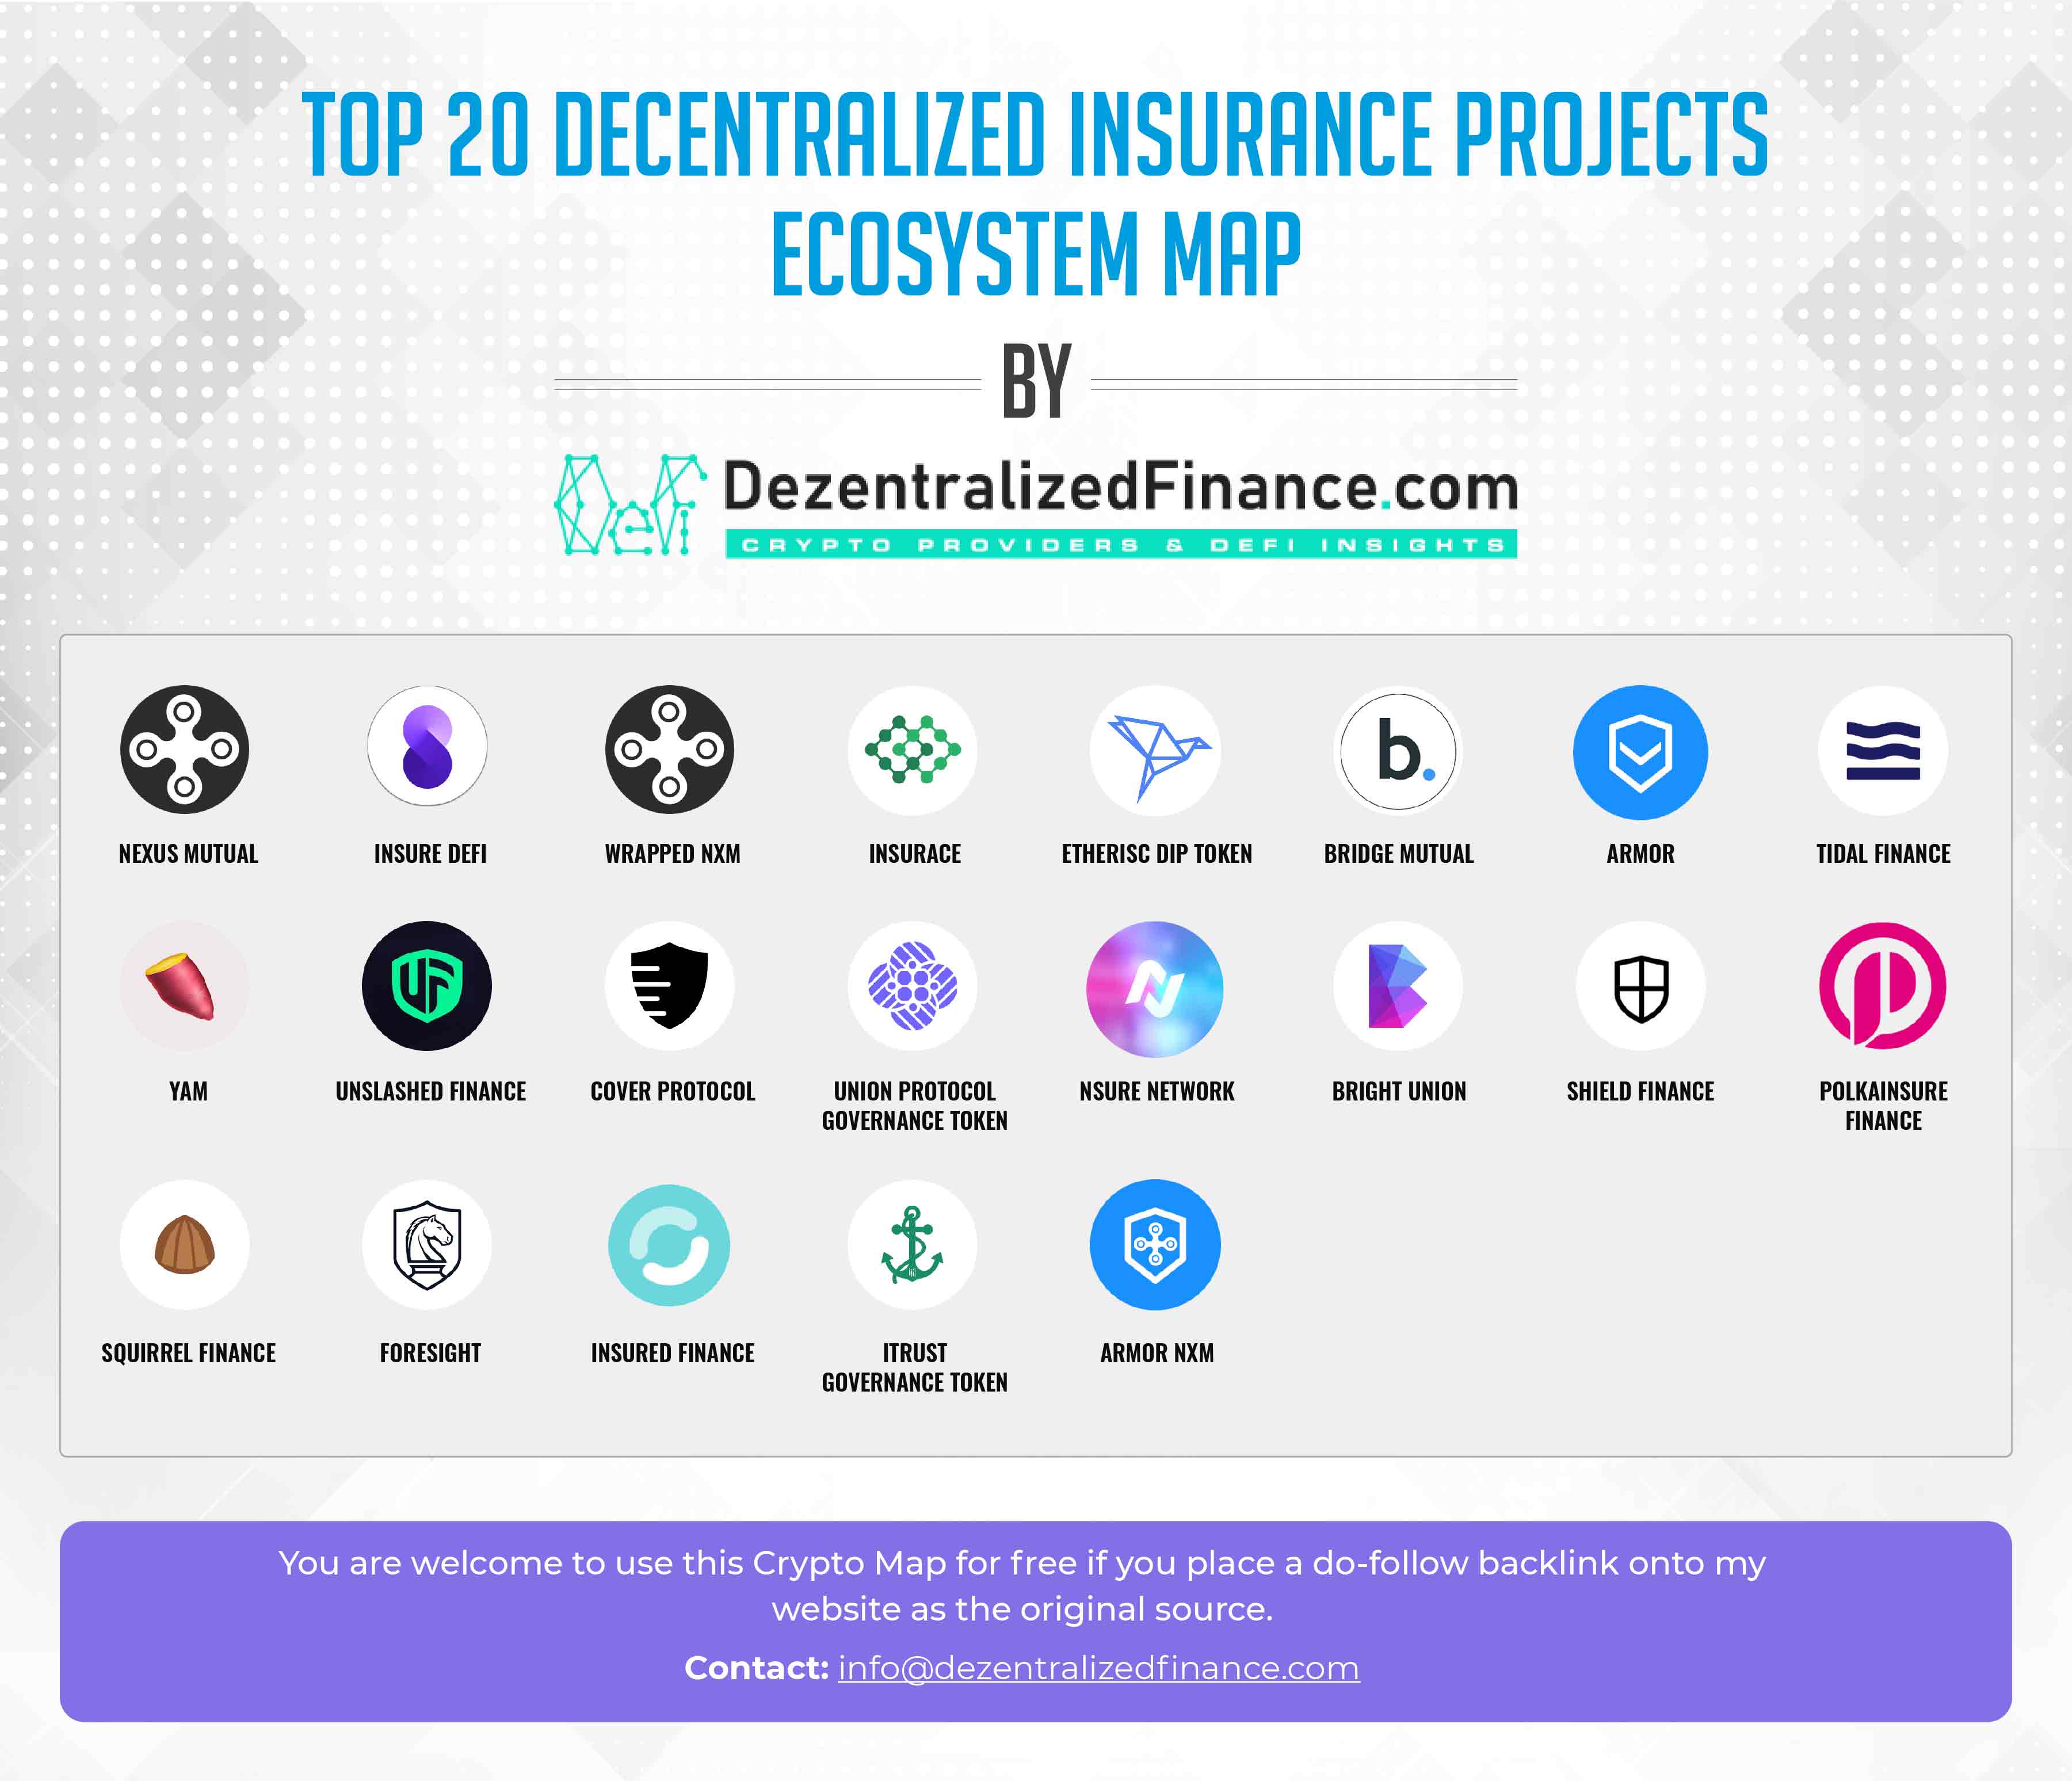 Top-20-Decentralized-Insurance-Projects-Ecosystem-v1-01